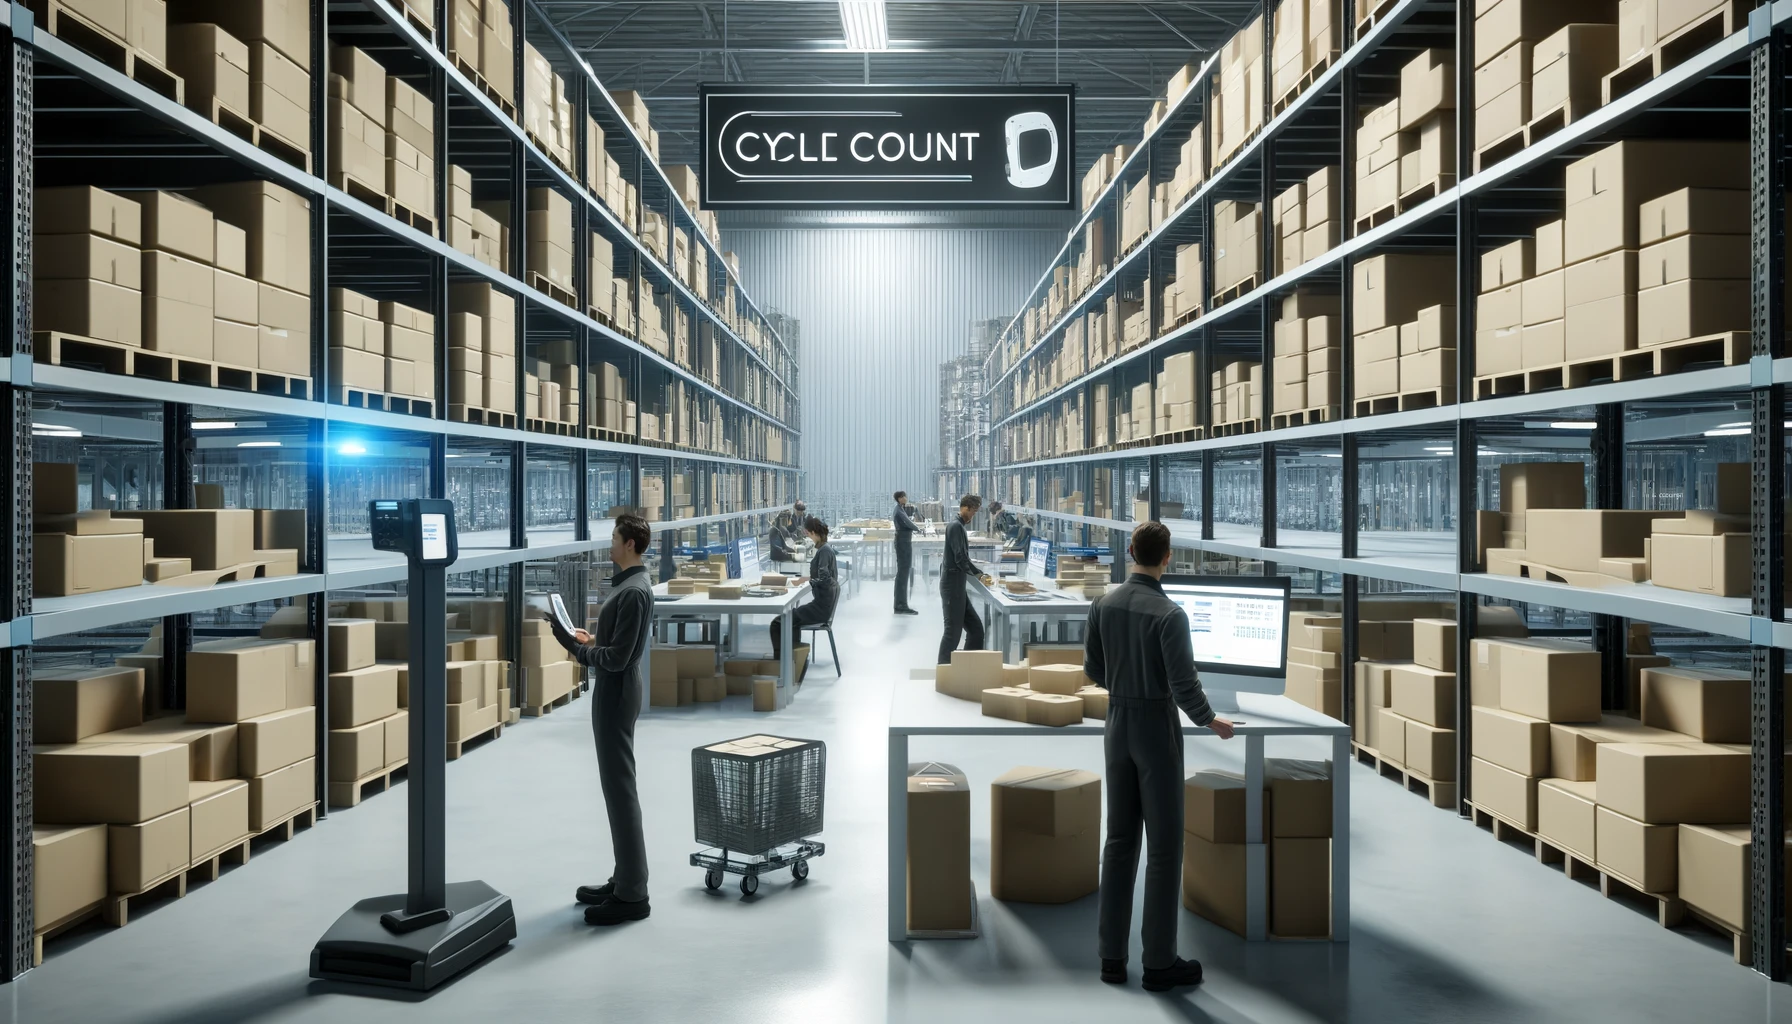 Interior of a modern warehouse with workers using scanners among organized shelves full of various-sized boxes, emphasizing 'Cycle Count' inventory management without any desks or computers